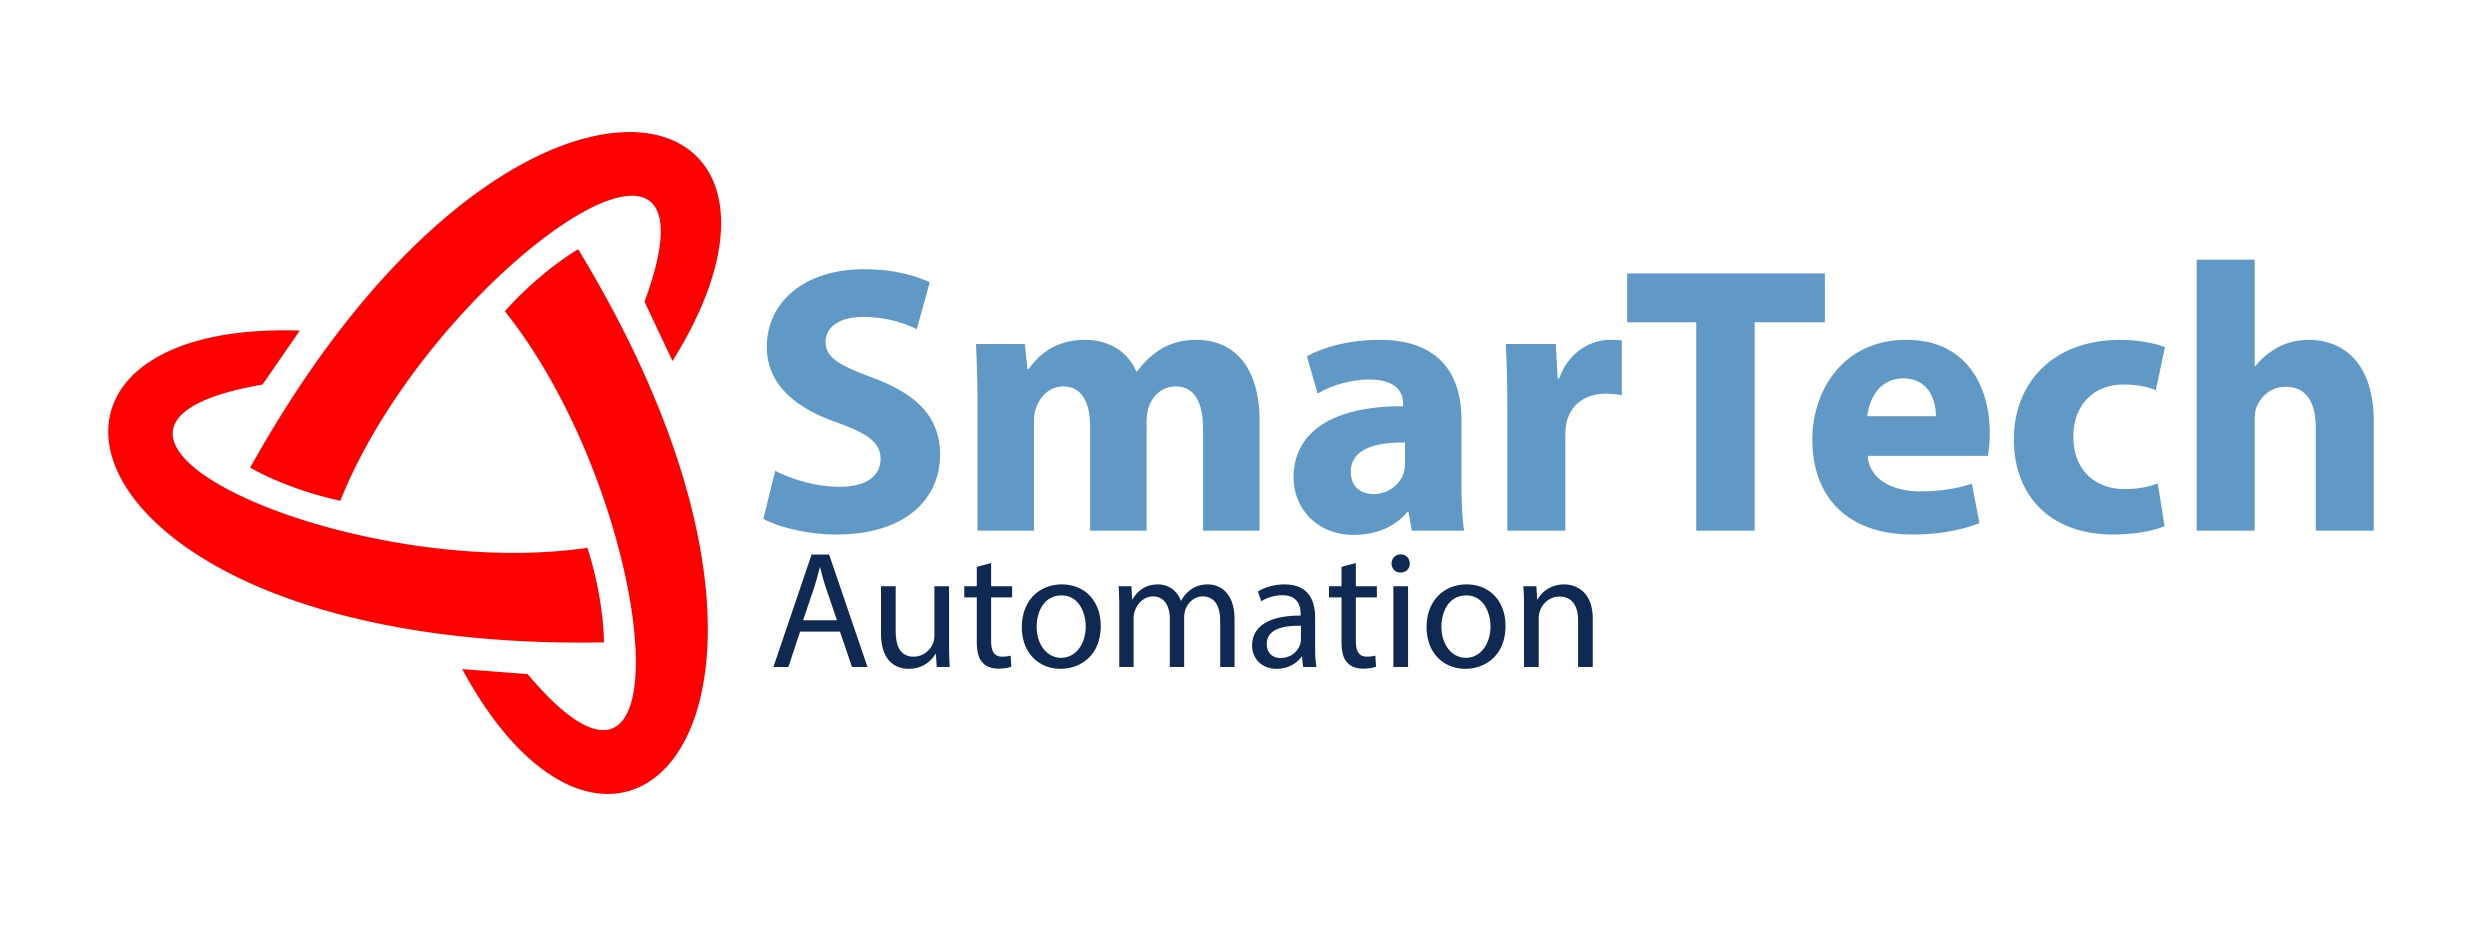 We welcome Smartech Automation as a new Elvaco Partner